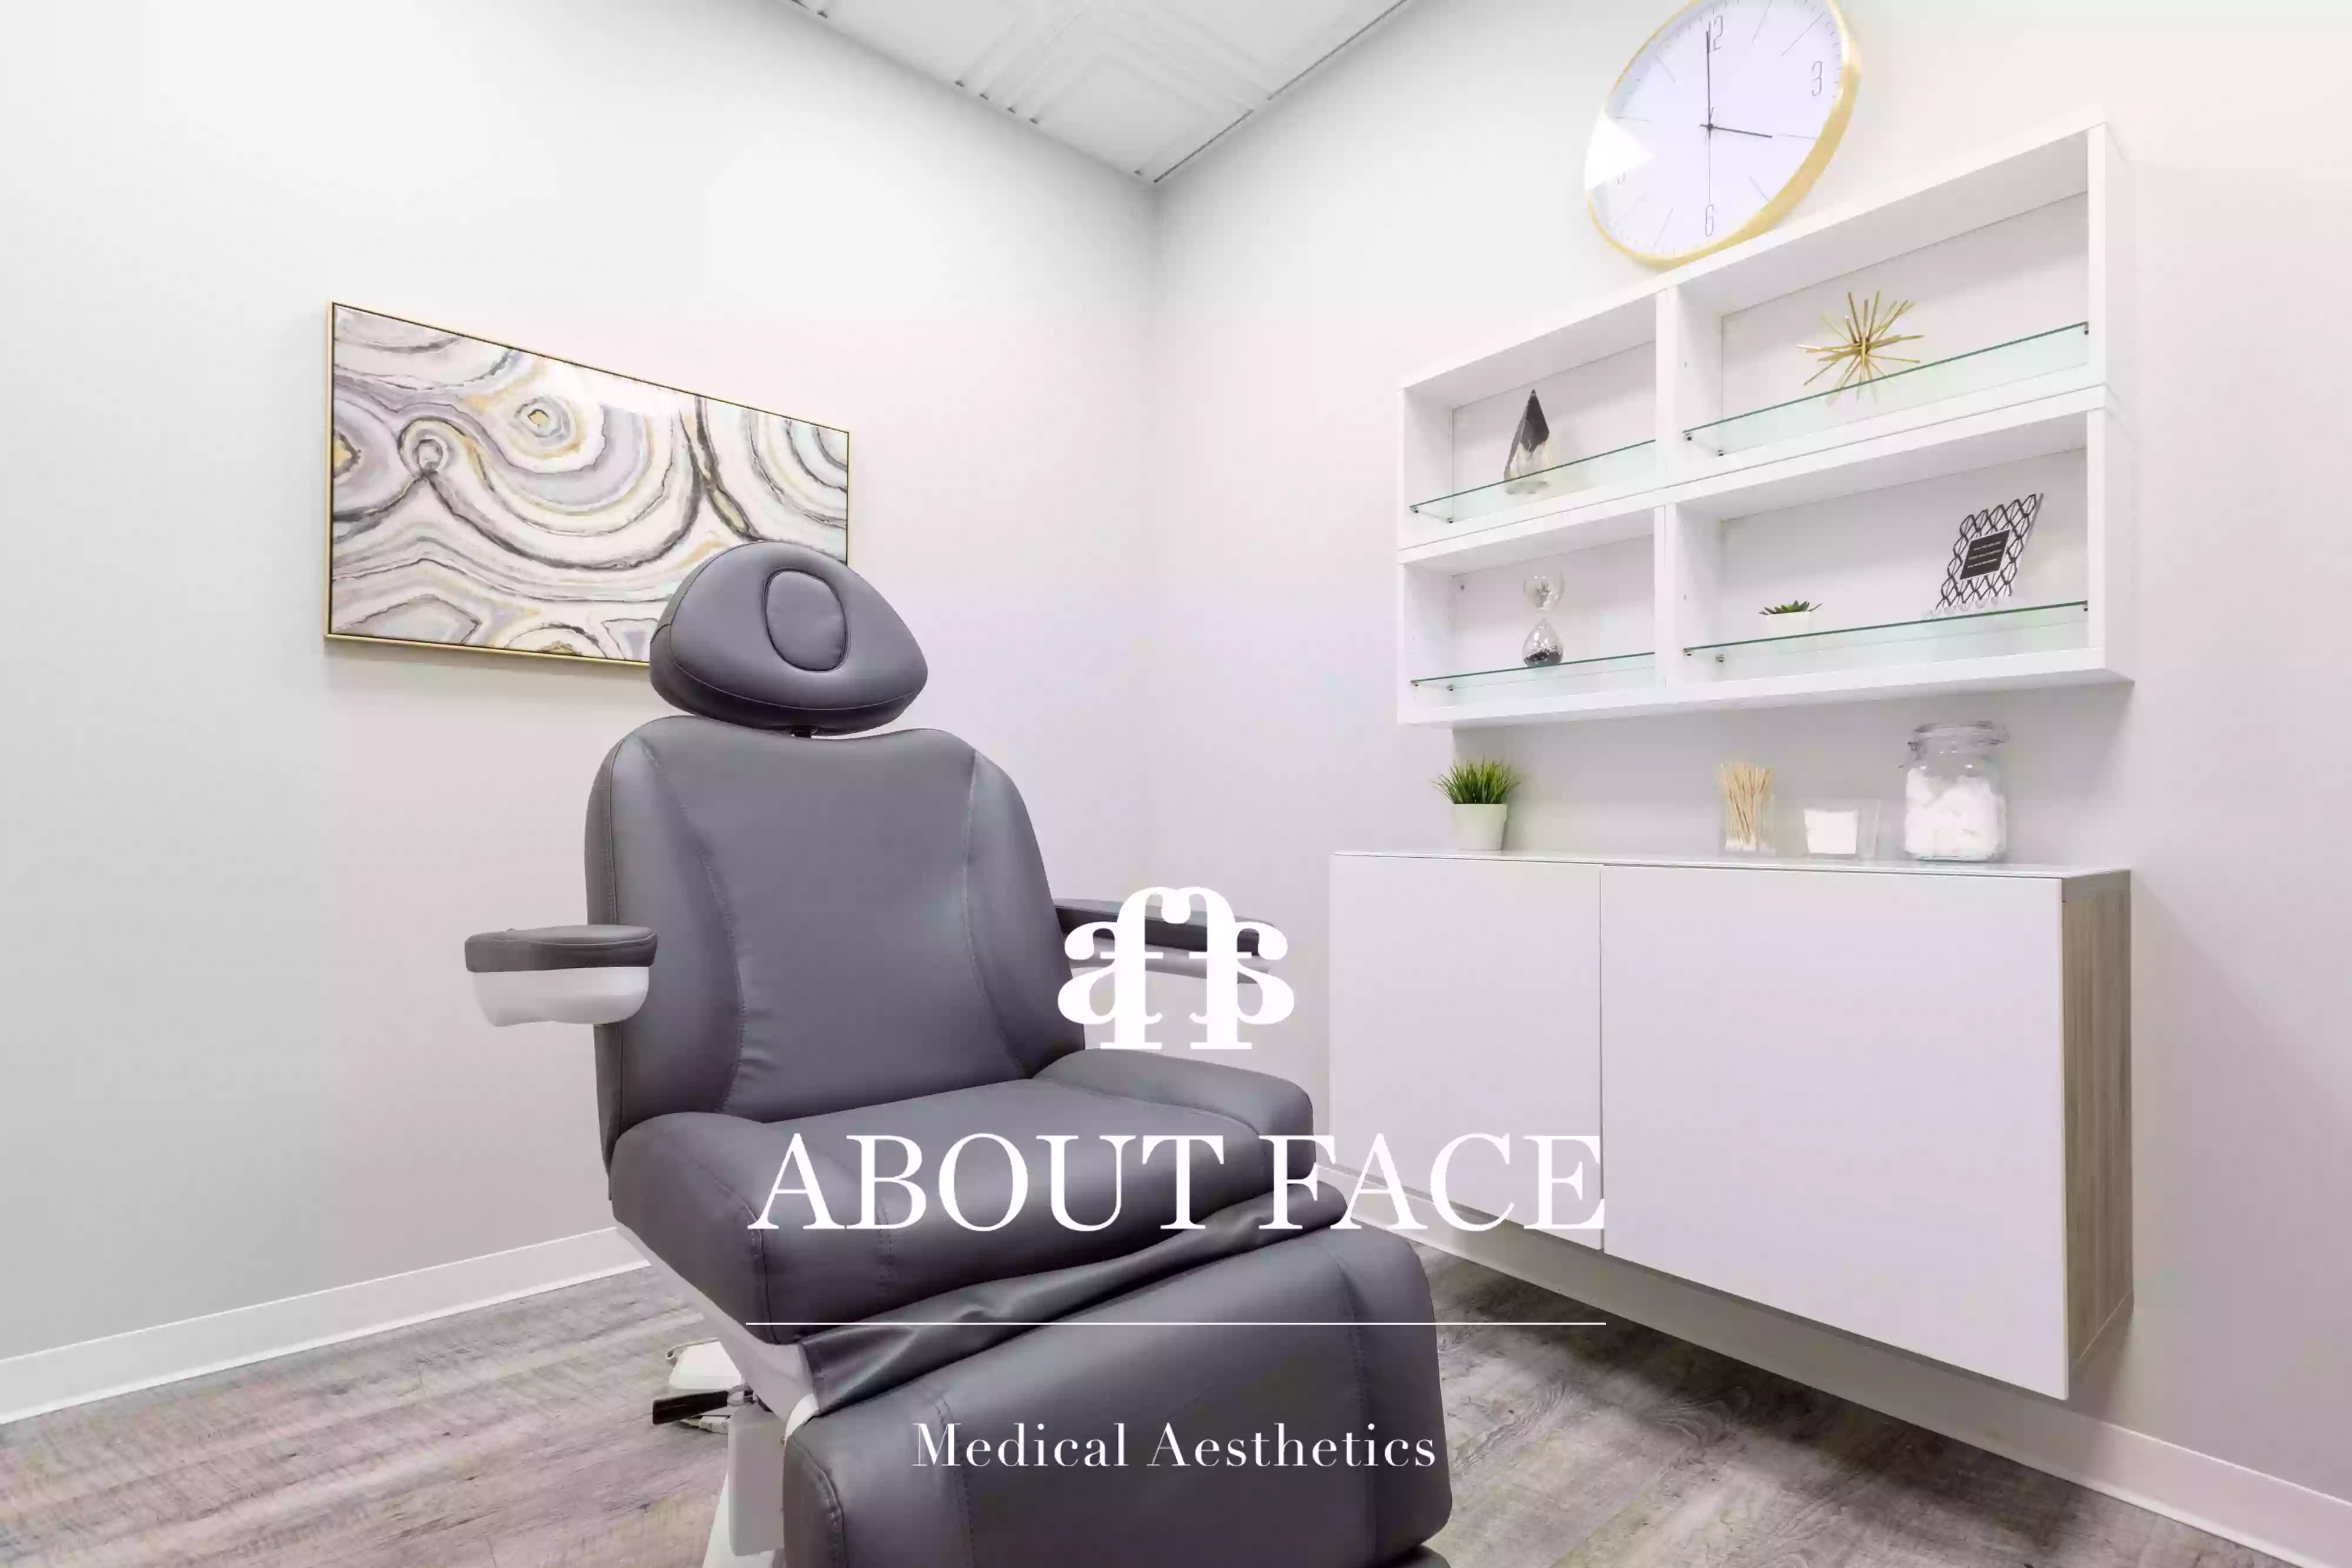 About Face Medical Aesthetics